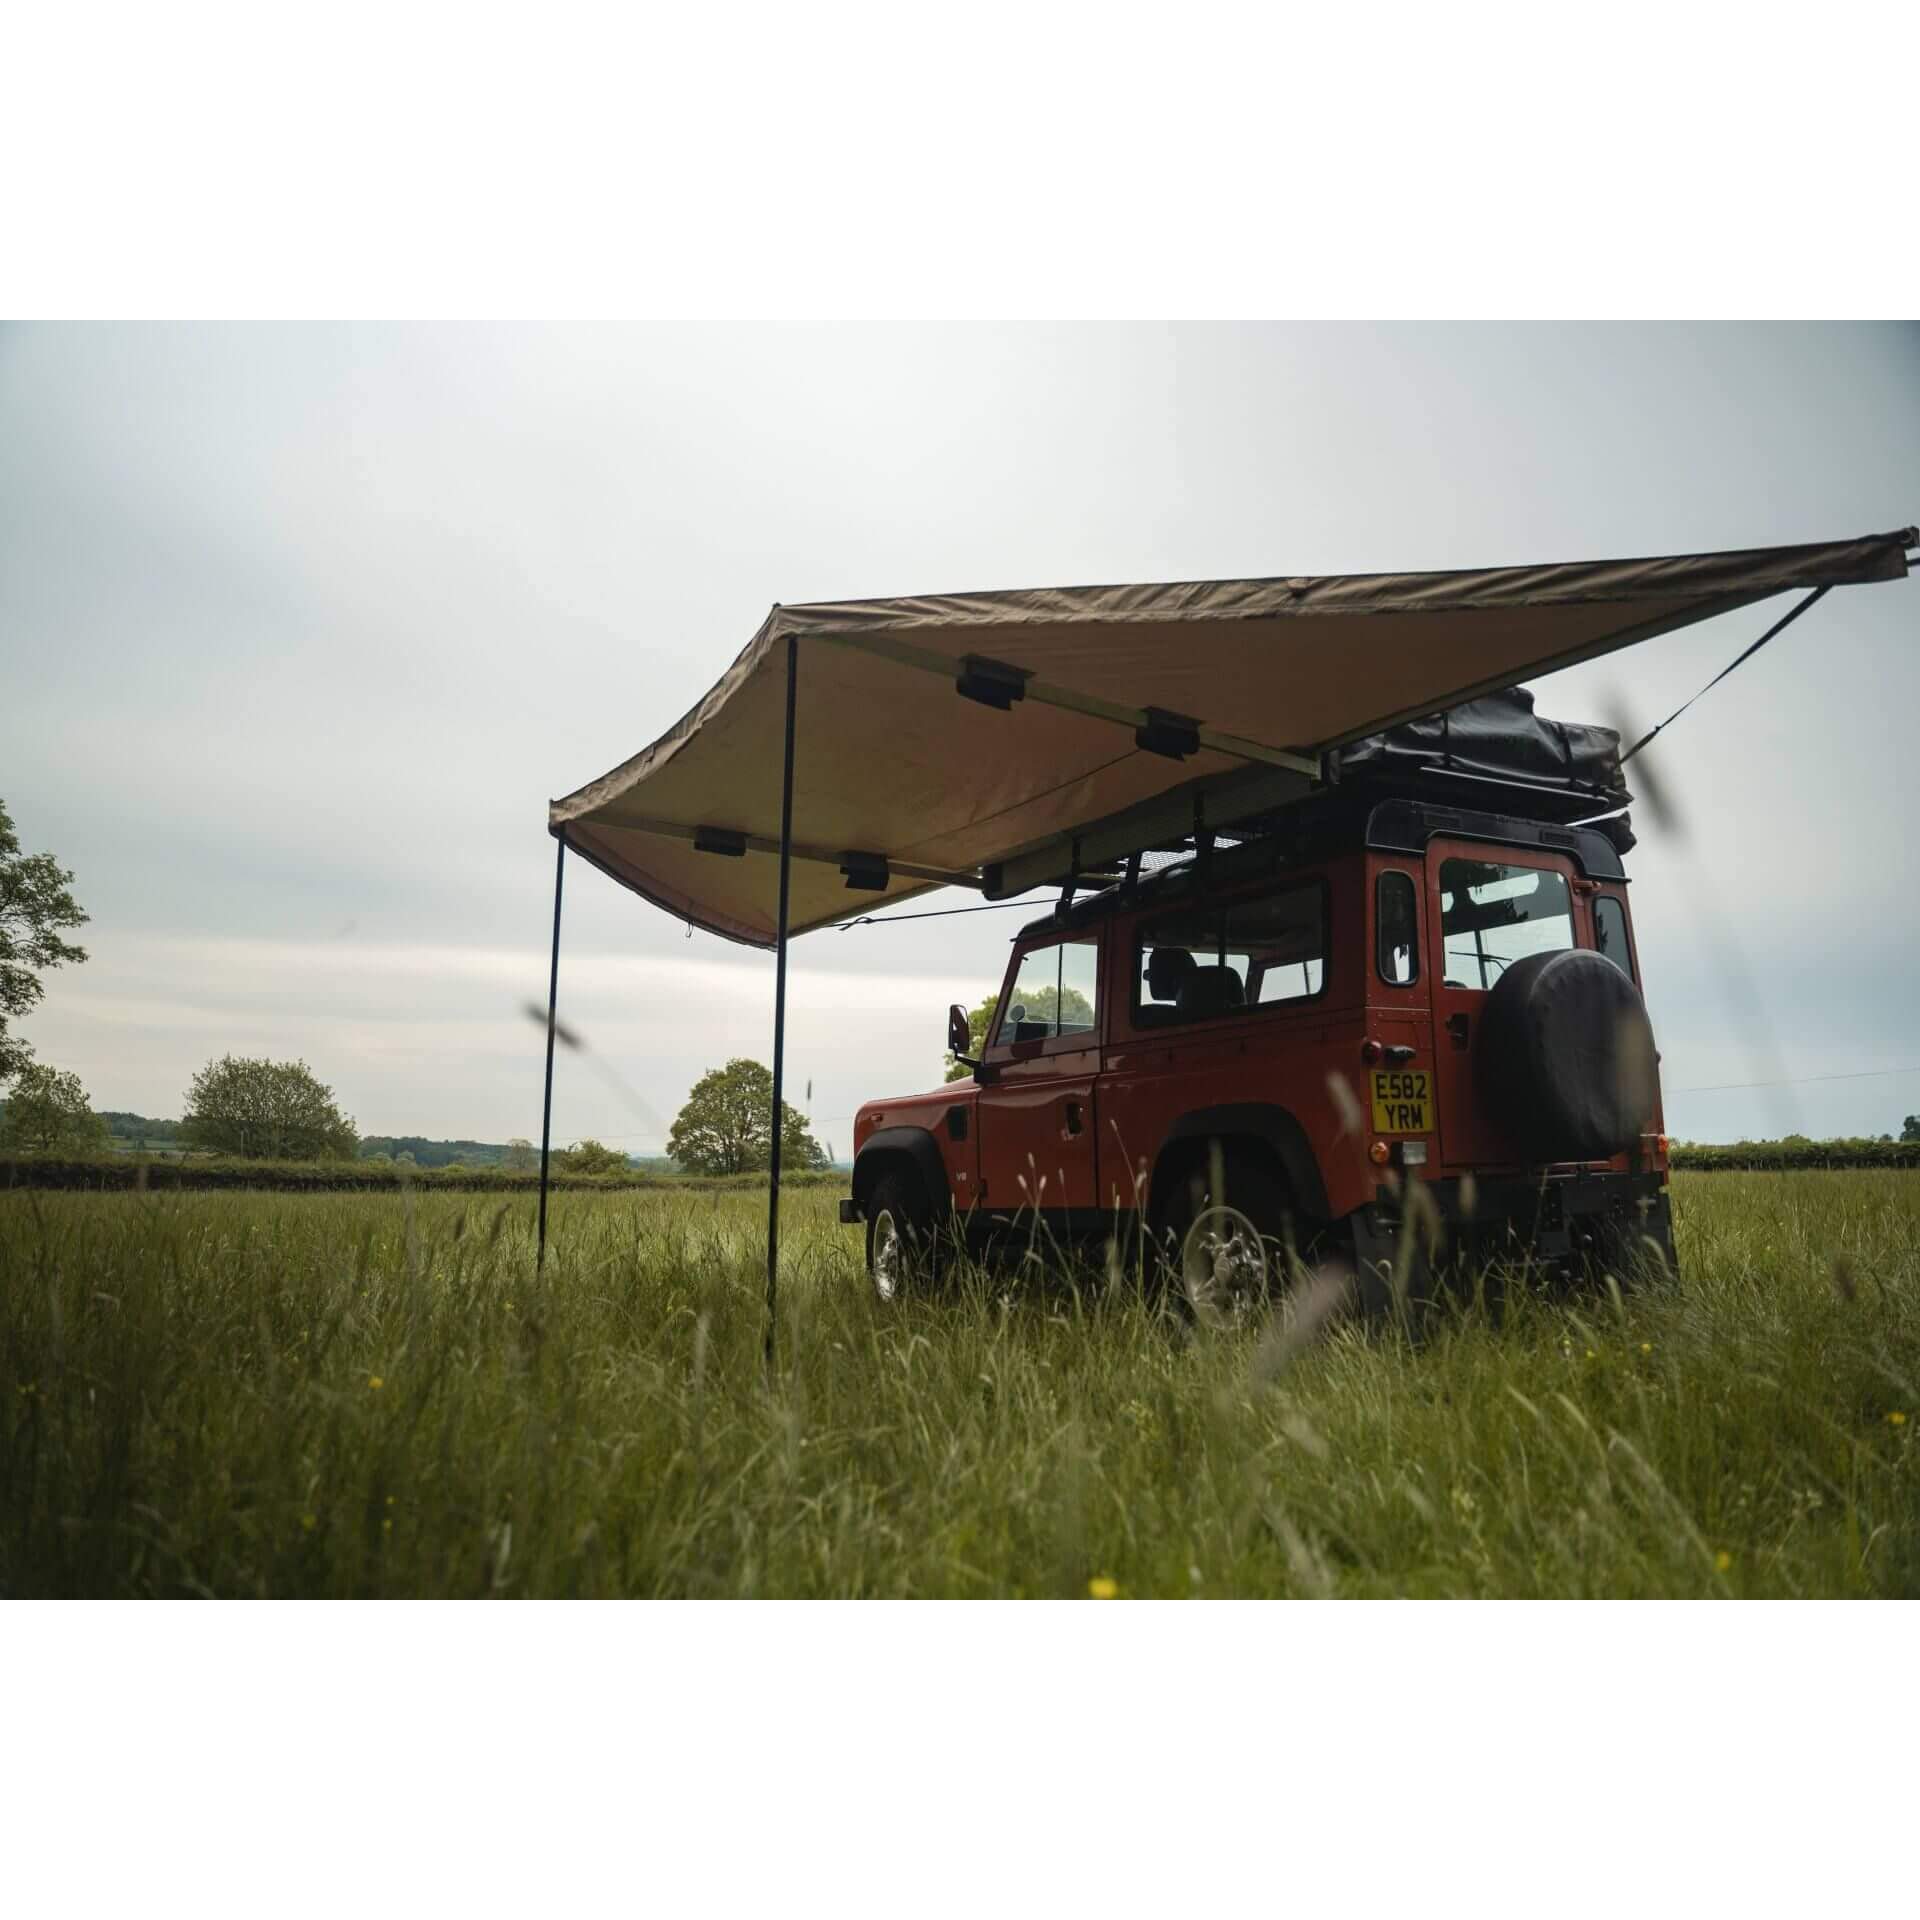 180 Sand Yellow Expedition Foldout Vehicle Camping Side Awning + Side Walls -  - sold by Direct4x4